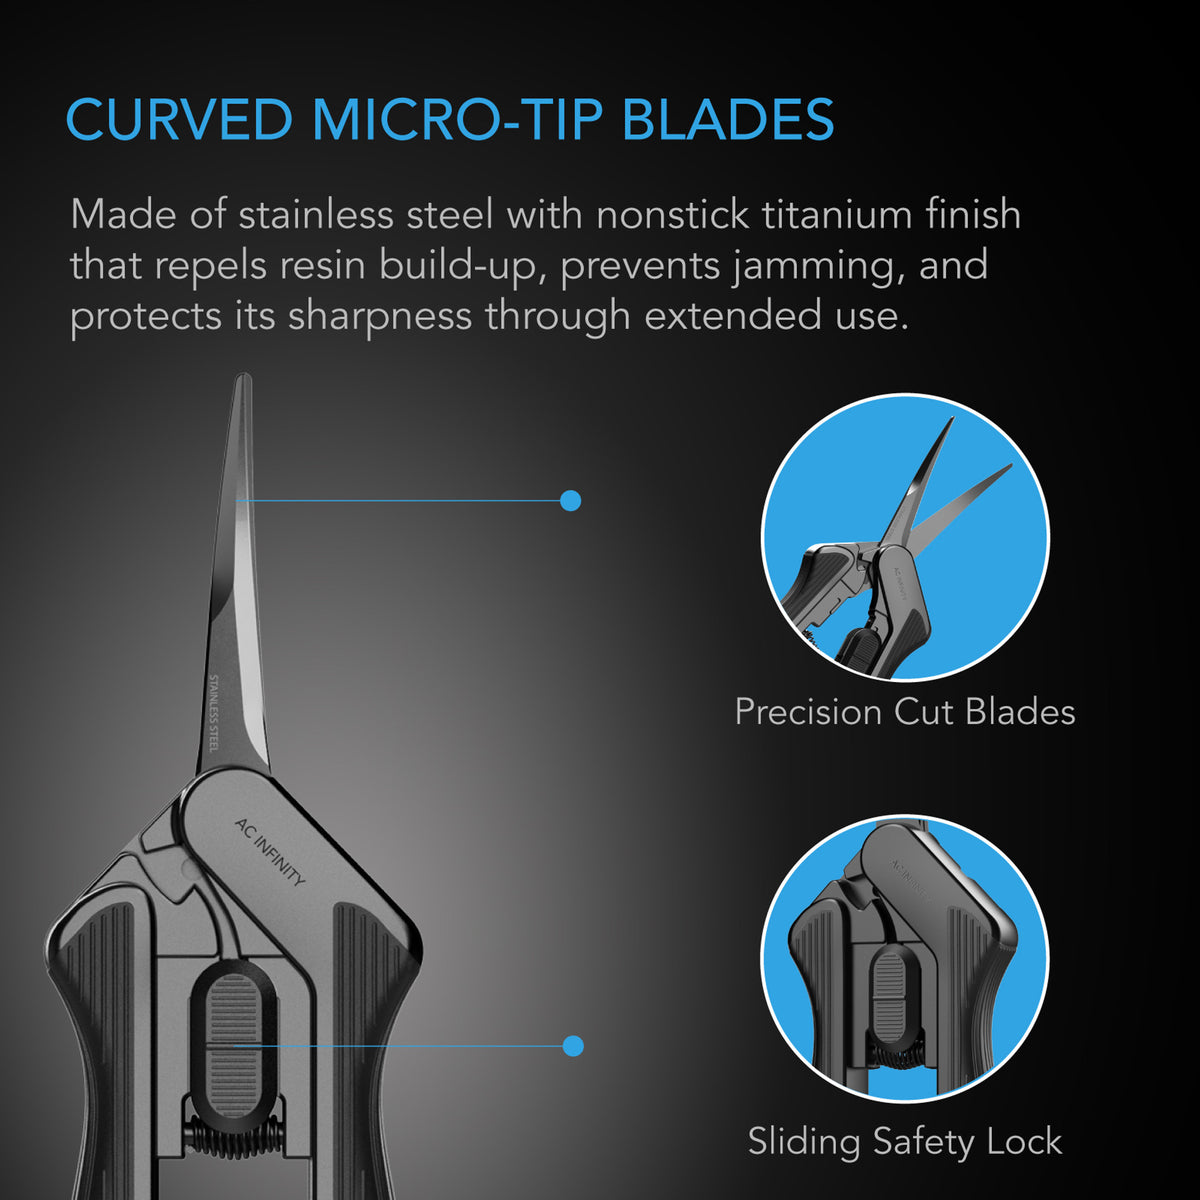 Curved Micro tip blades